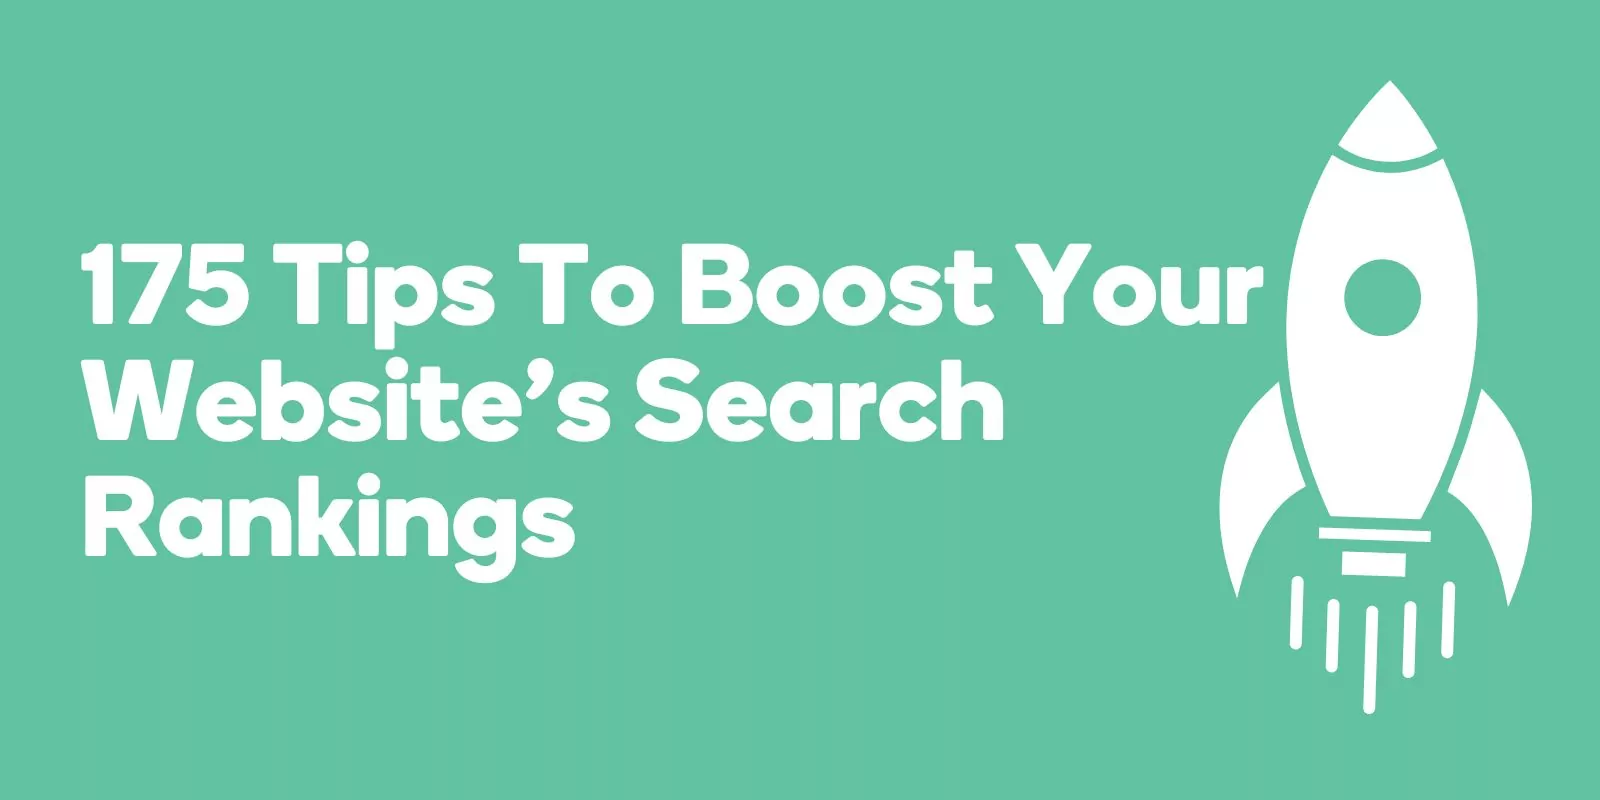 175 Tips To Boost Your Website's Search Rankings